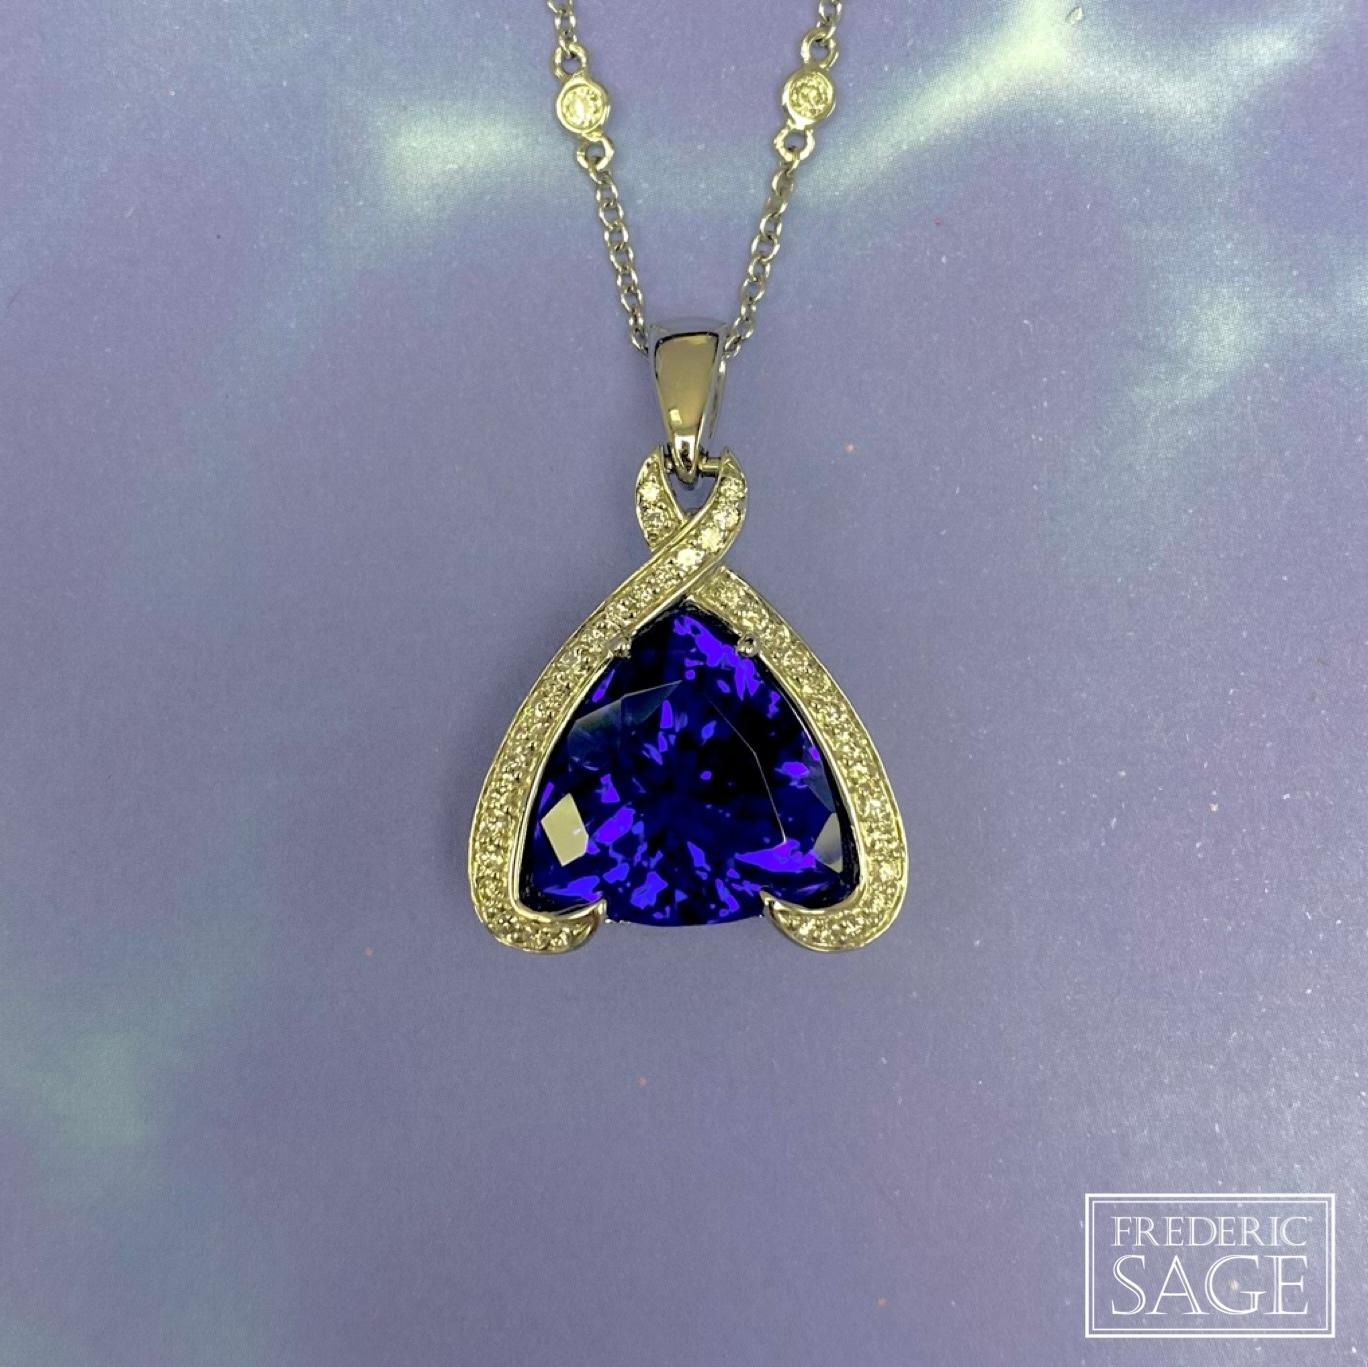 Women's Frederic Sage Pendant Necklace in Trillion Gem Tanzanite on White Gold For Sale